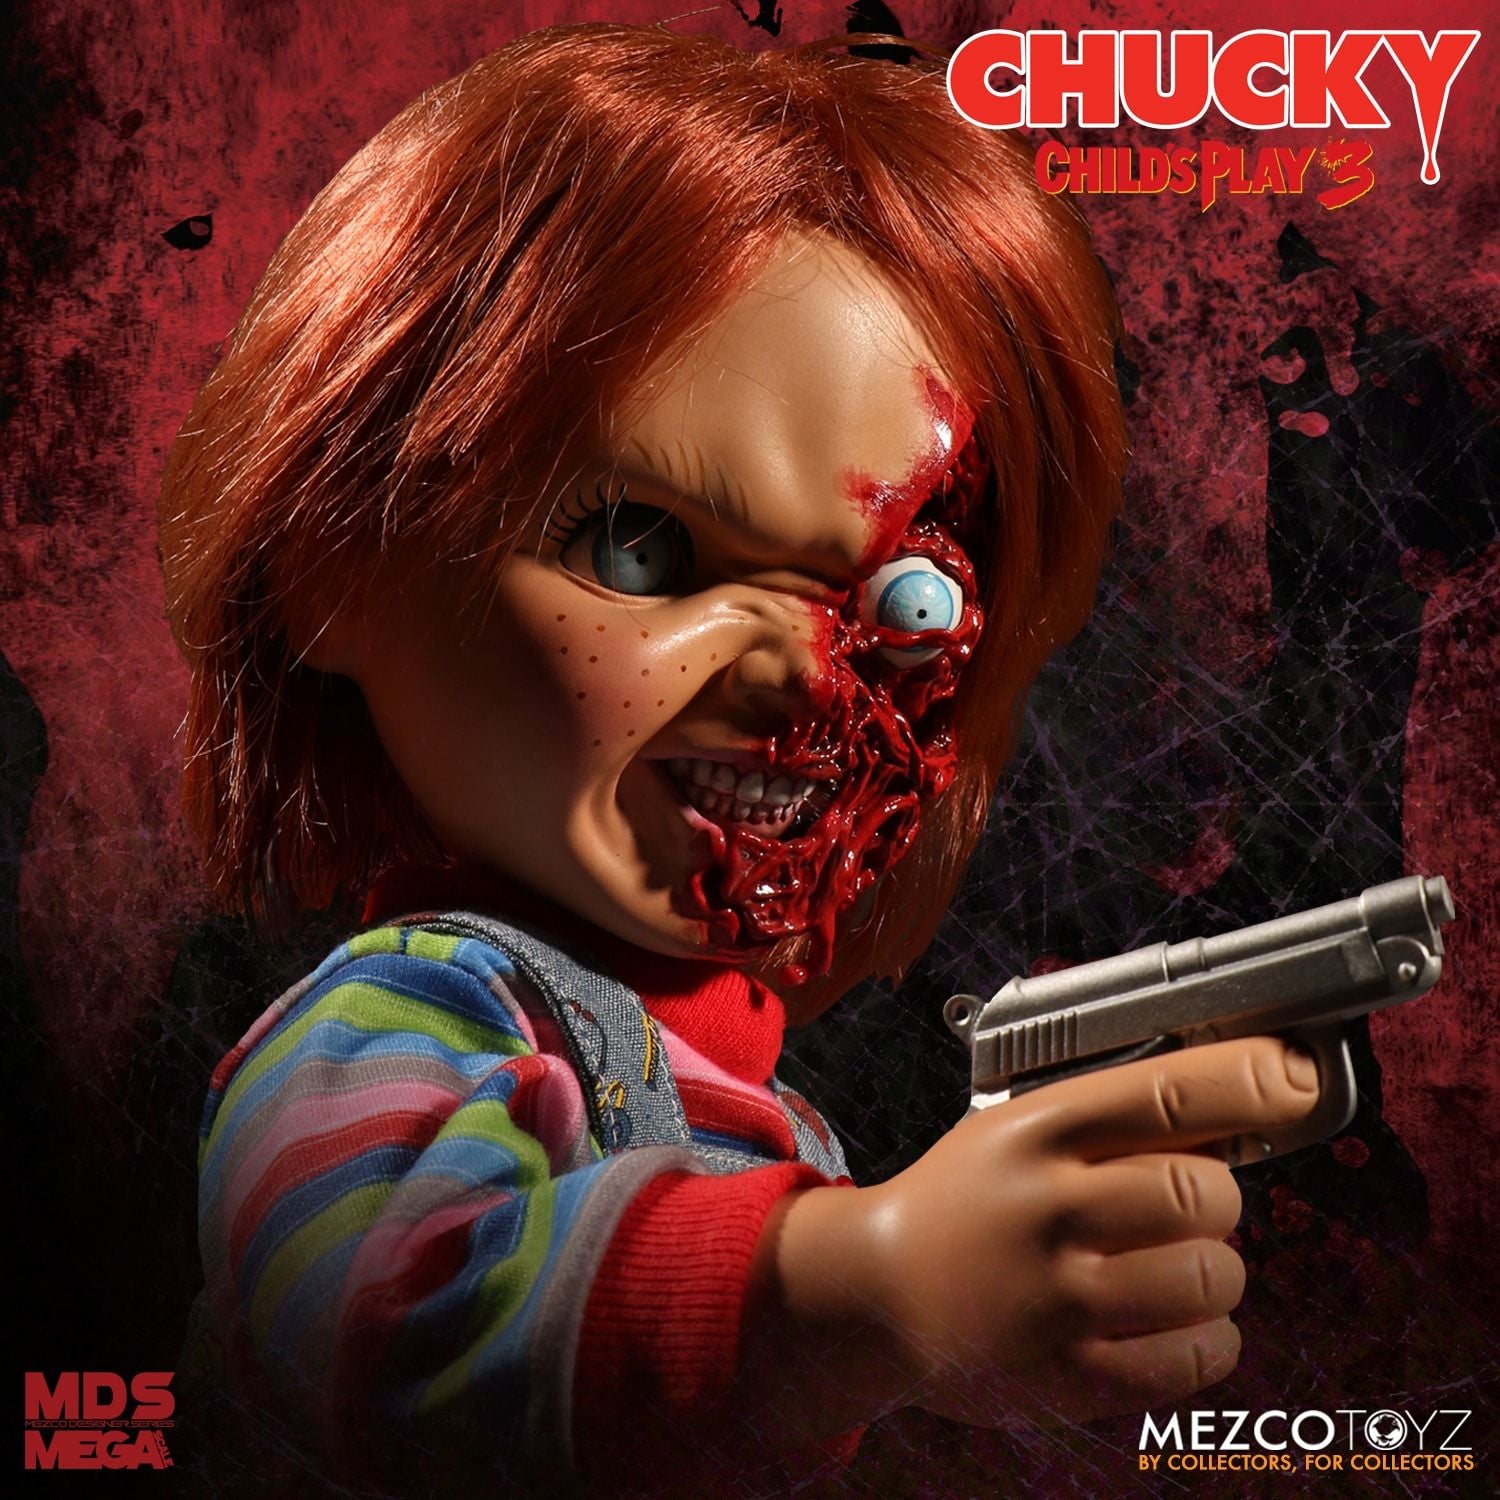 Child's Play 3: Talking Pizza Face Chucky by Mezco - Collectors Row Inc.